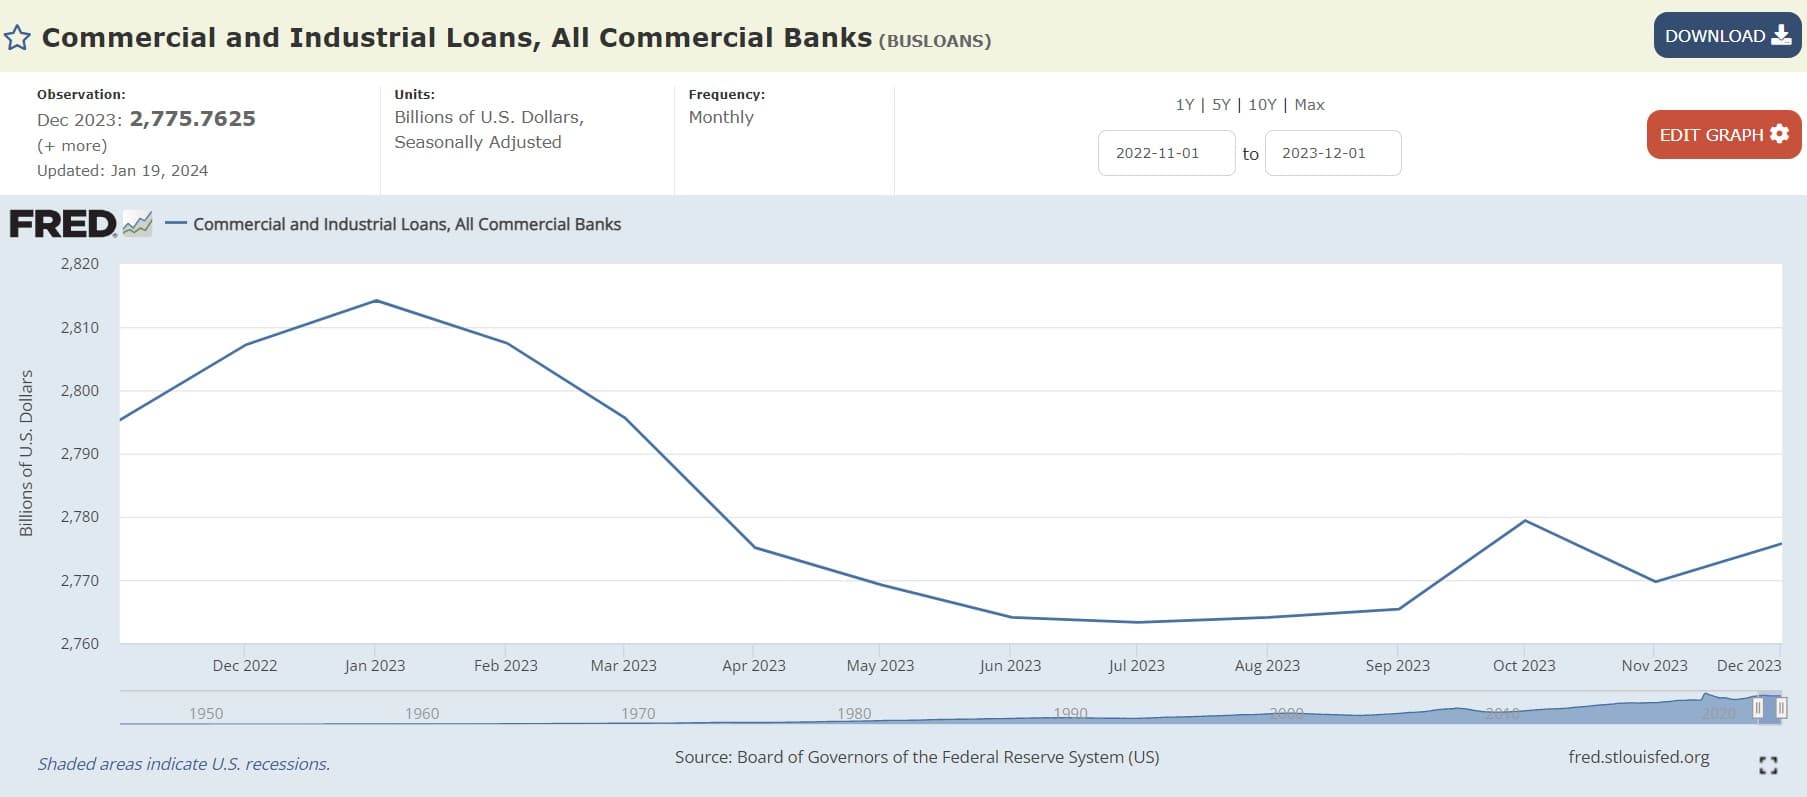 Commercial and Industrial Loans, All Commercial Banks